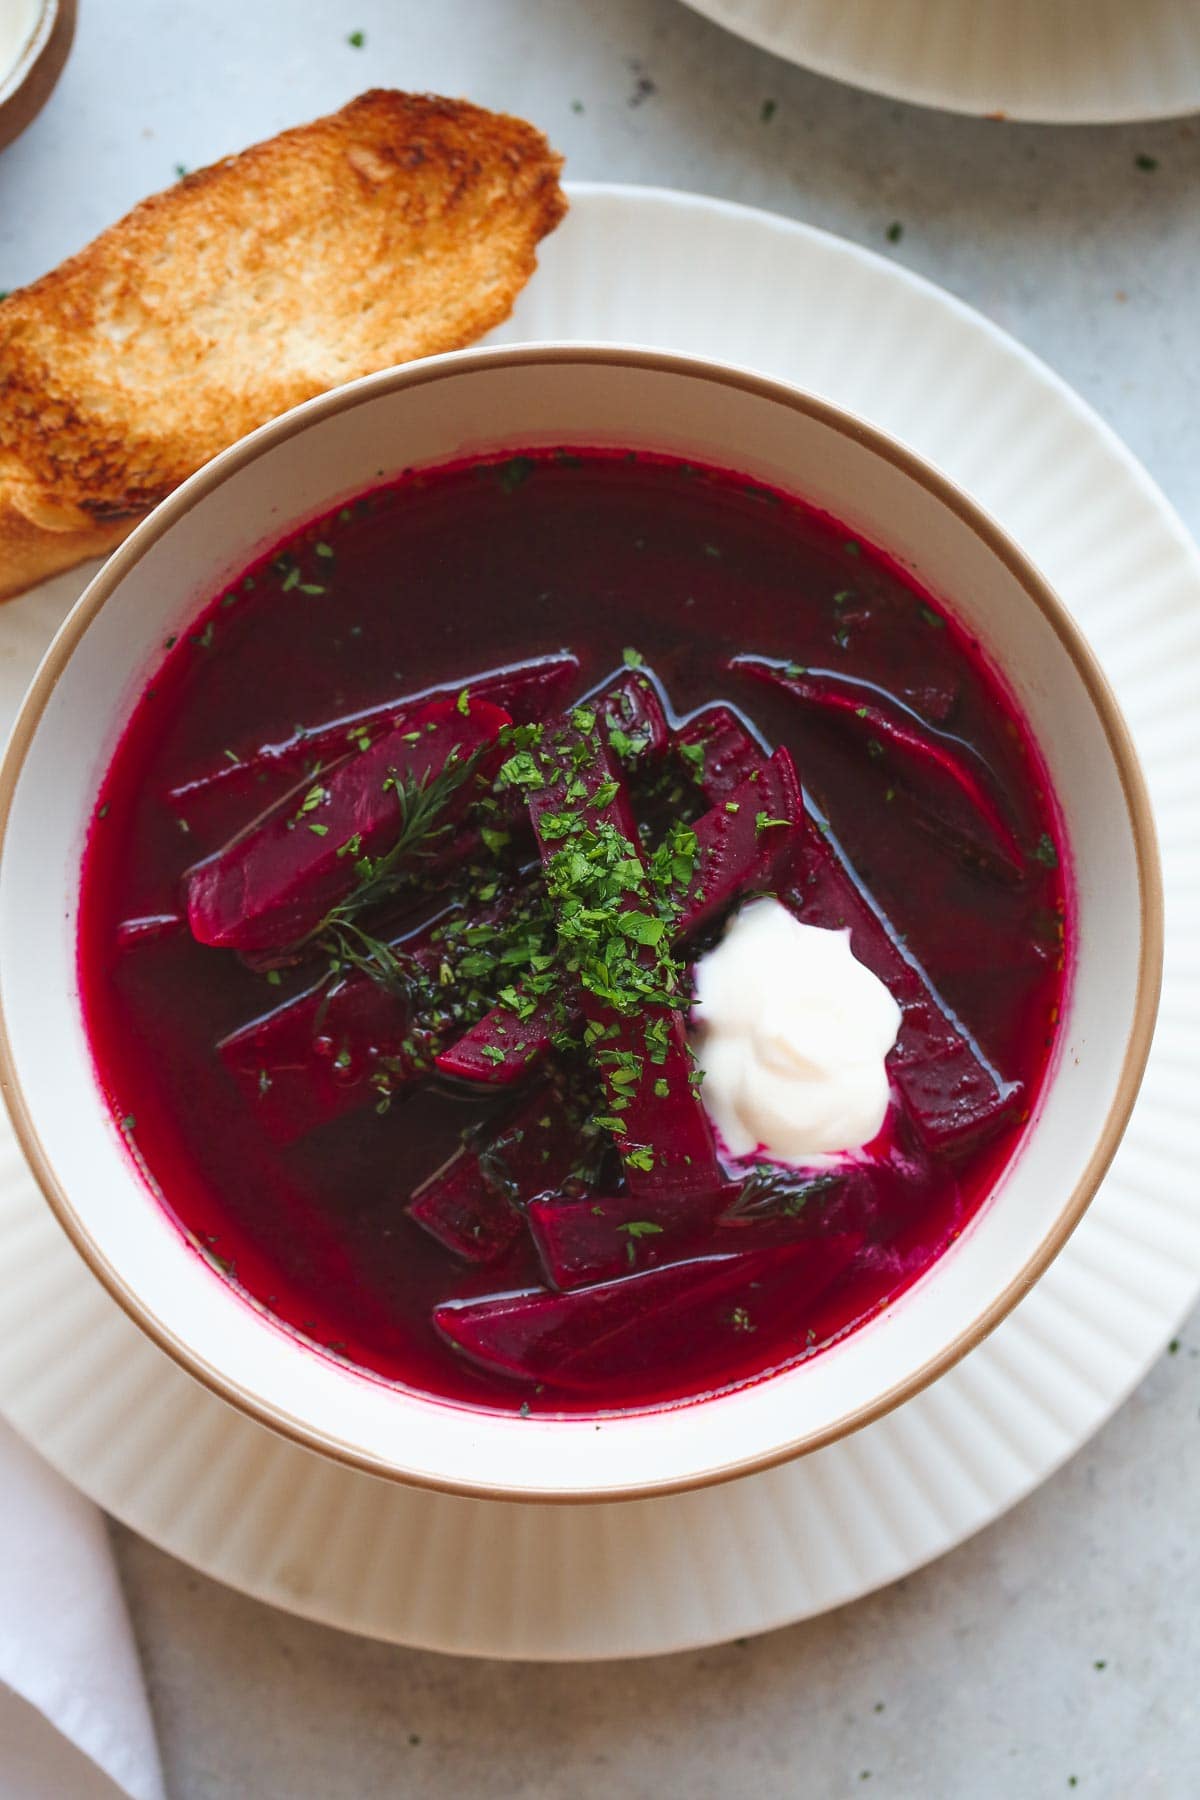 A close up shot of borsch beet soup with a dollop of smetana cream, garnished with chopped parsley